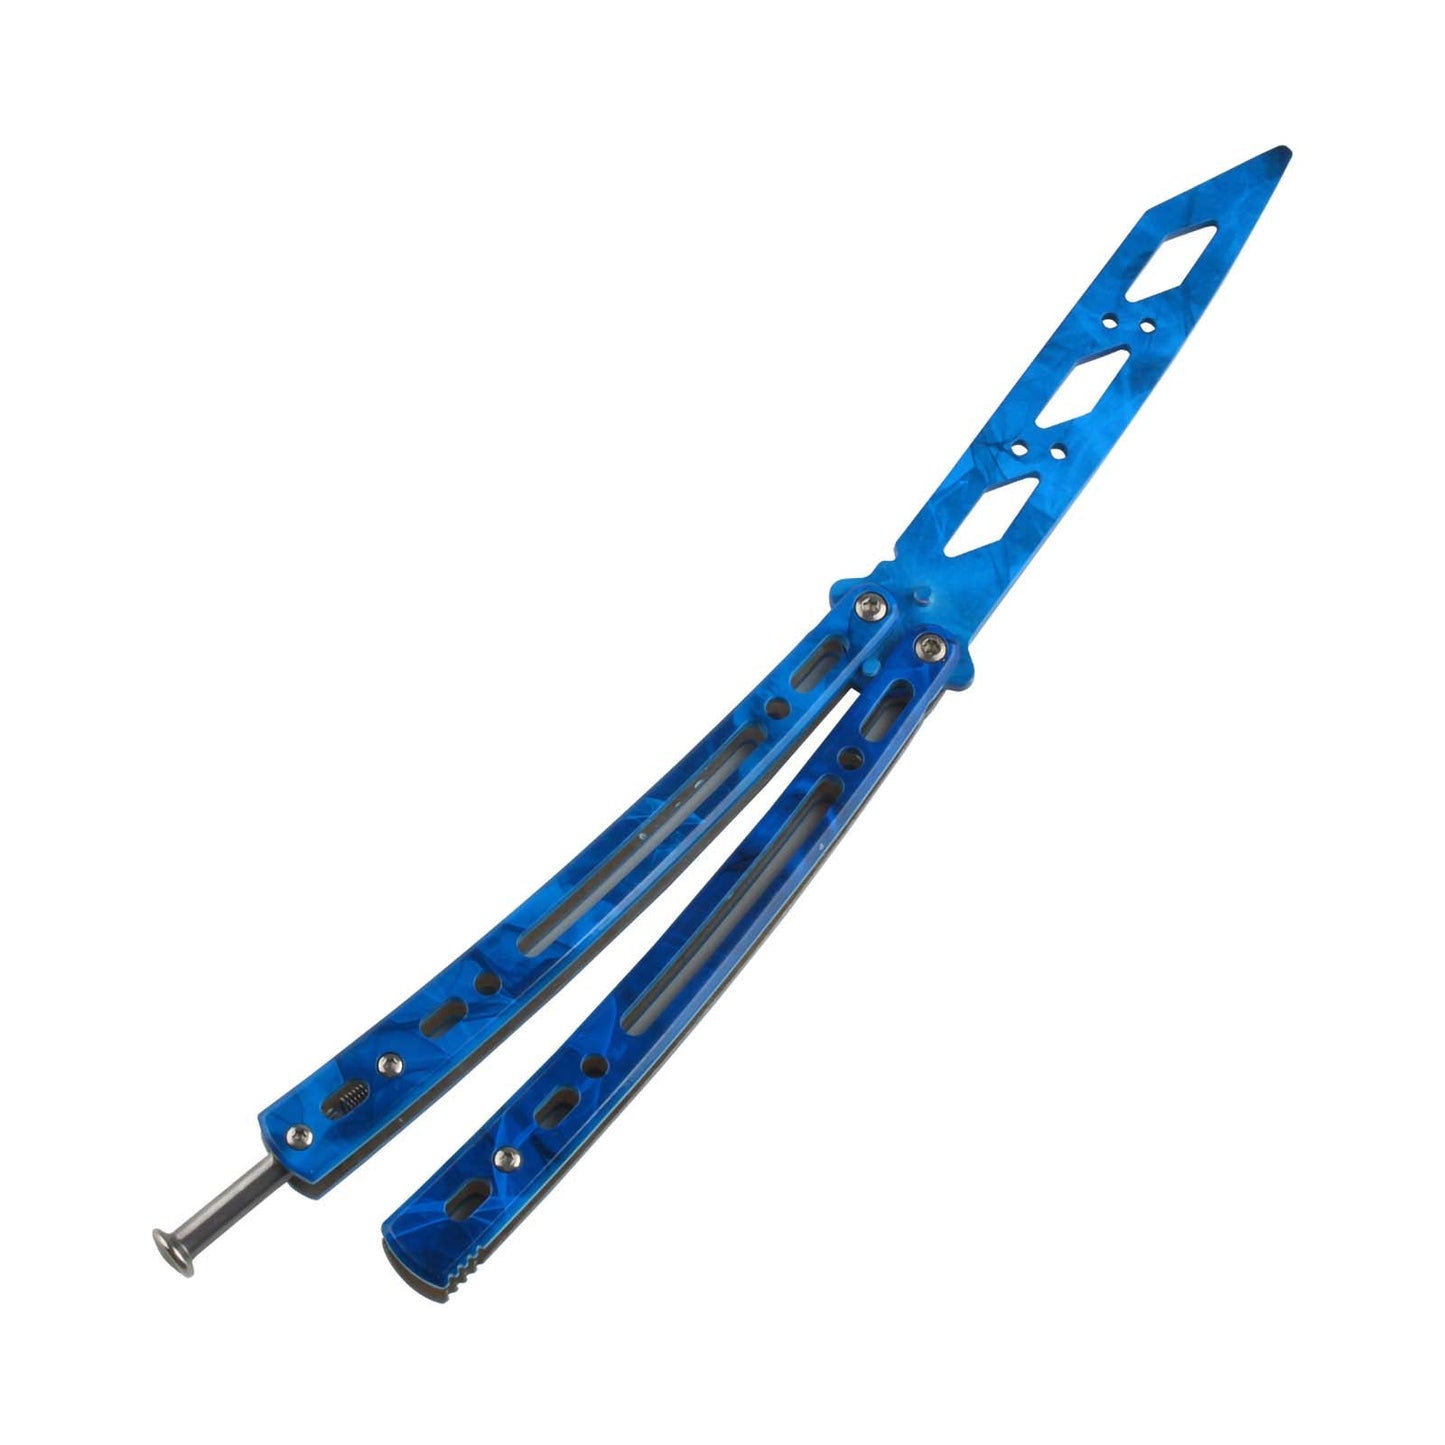 Andux Balisong Training Tool CS/HDD29 Light Blue(ONLY Available in EU Countries)